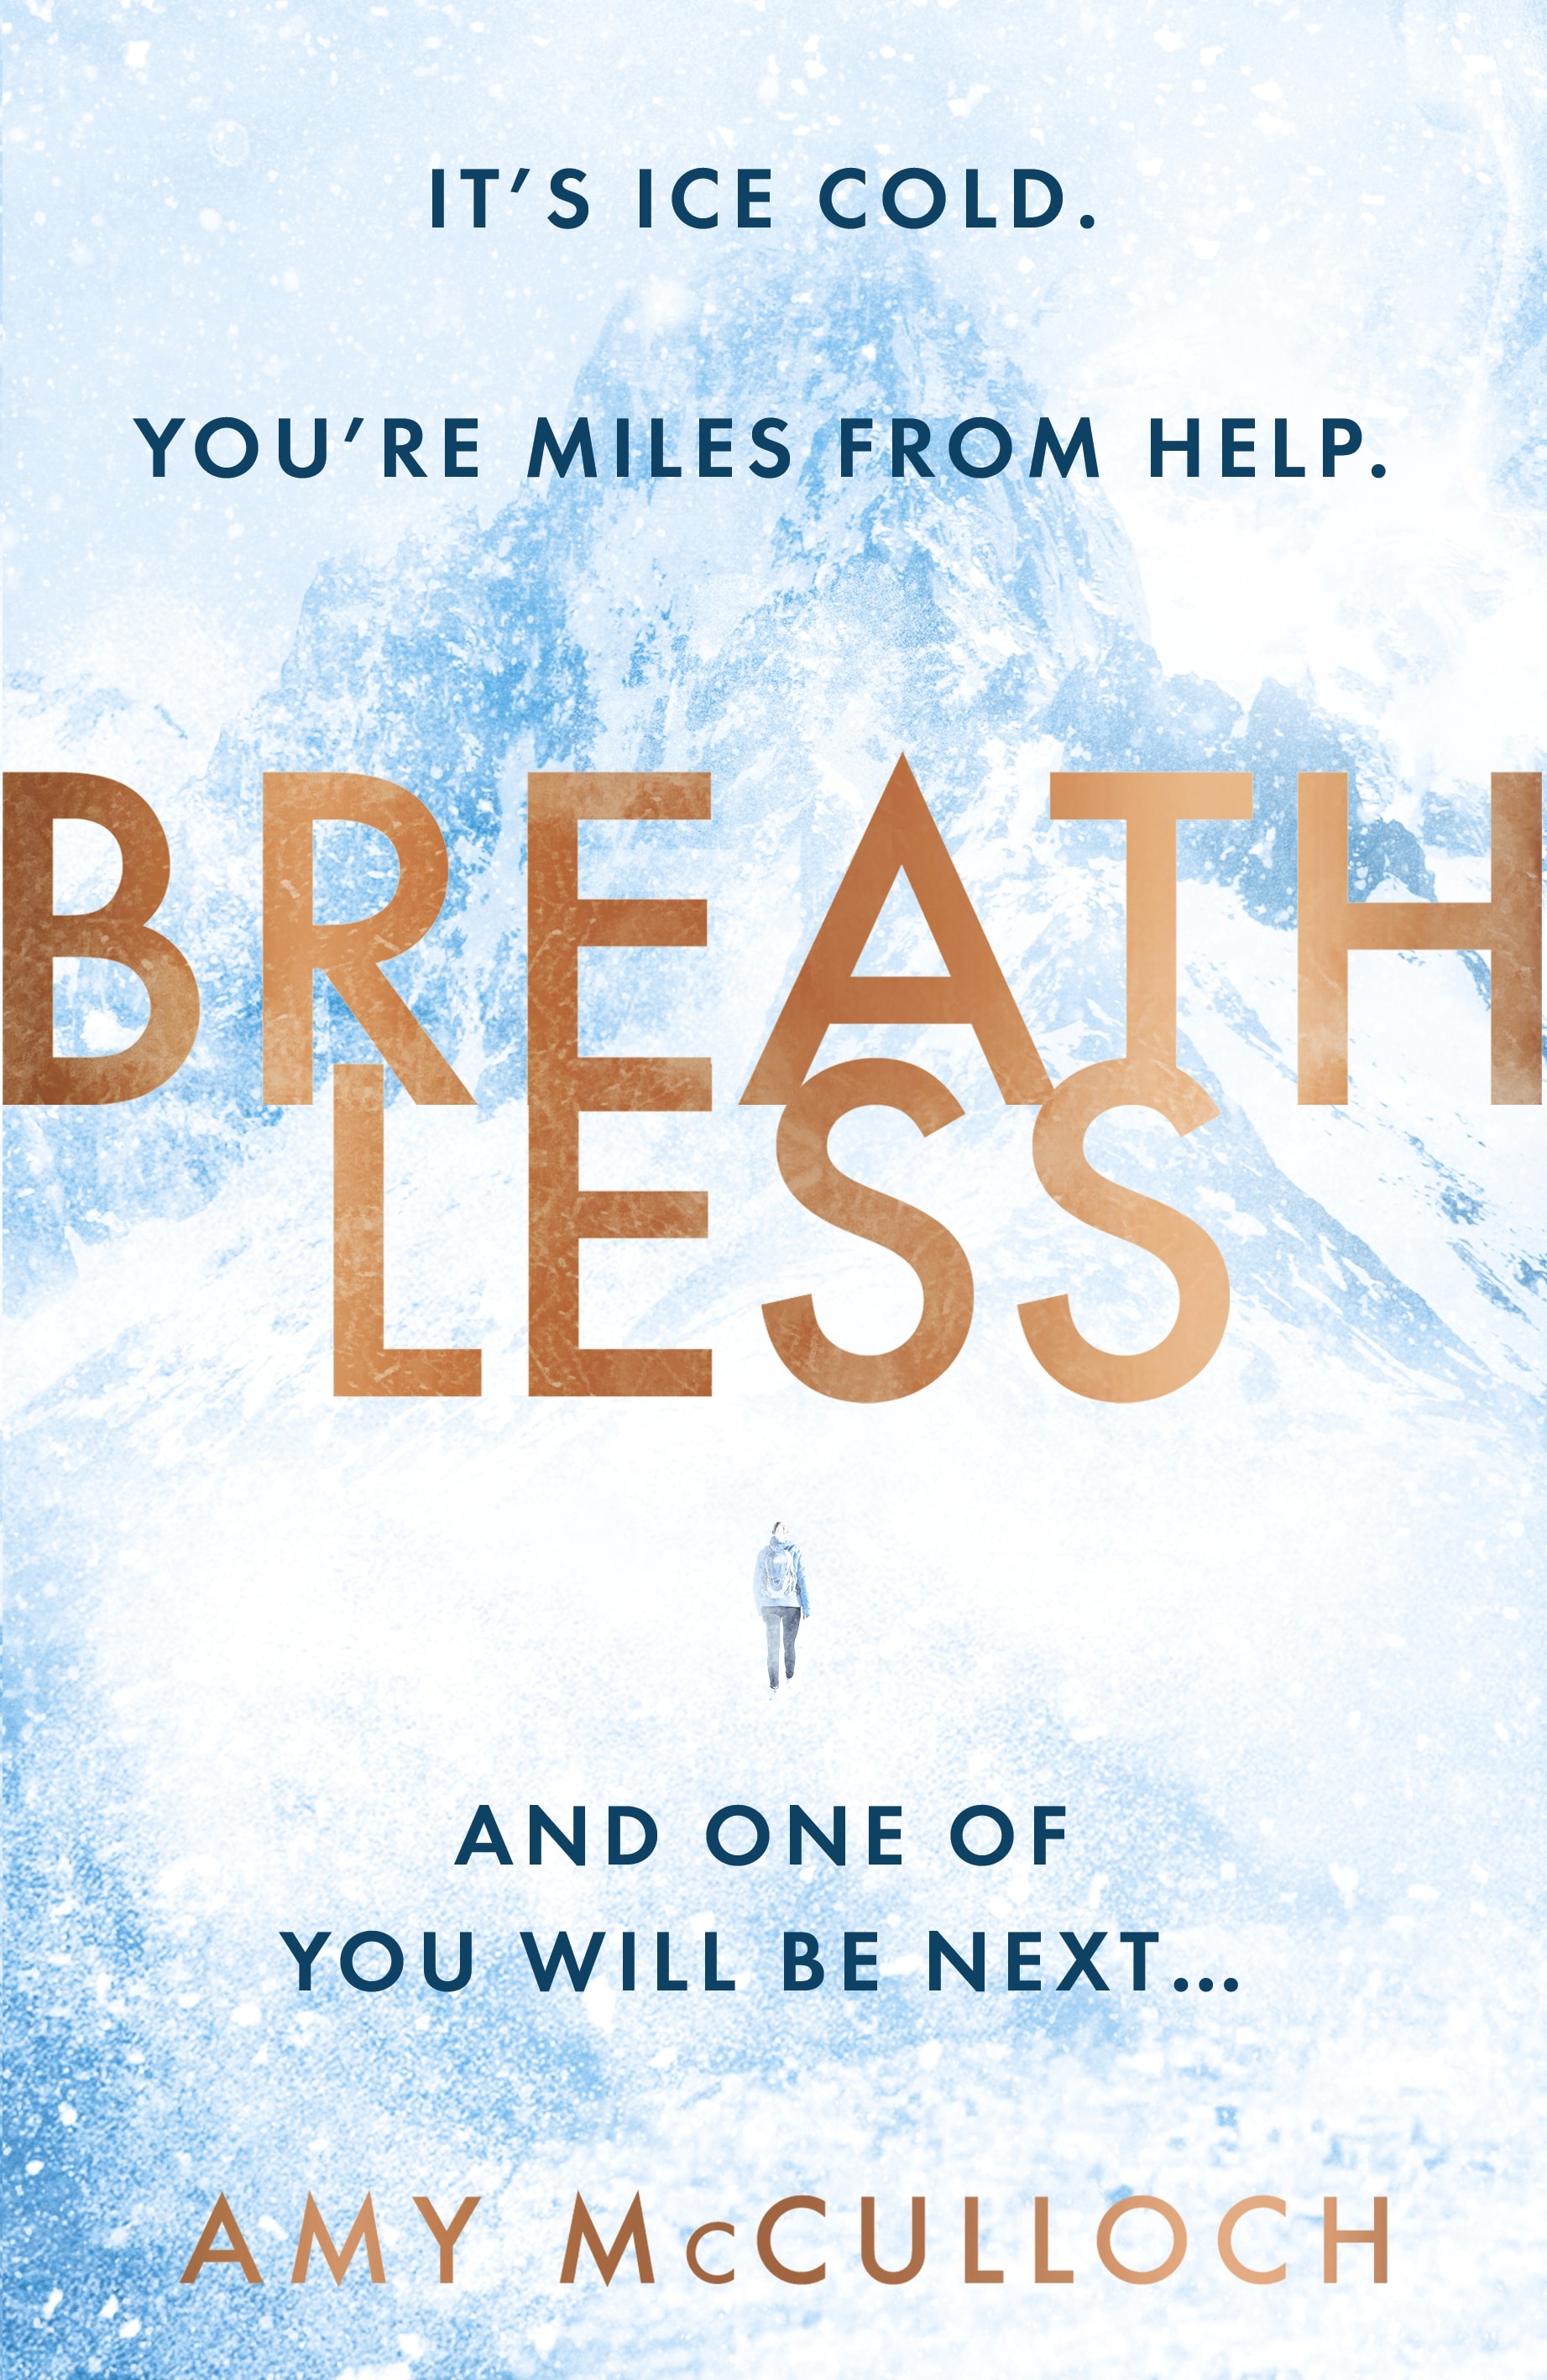 Extract: Breathless by Amy McCulloch